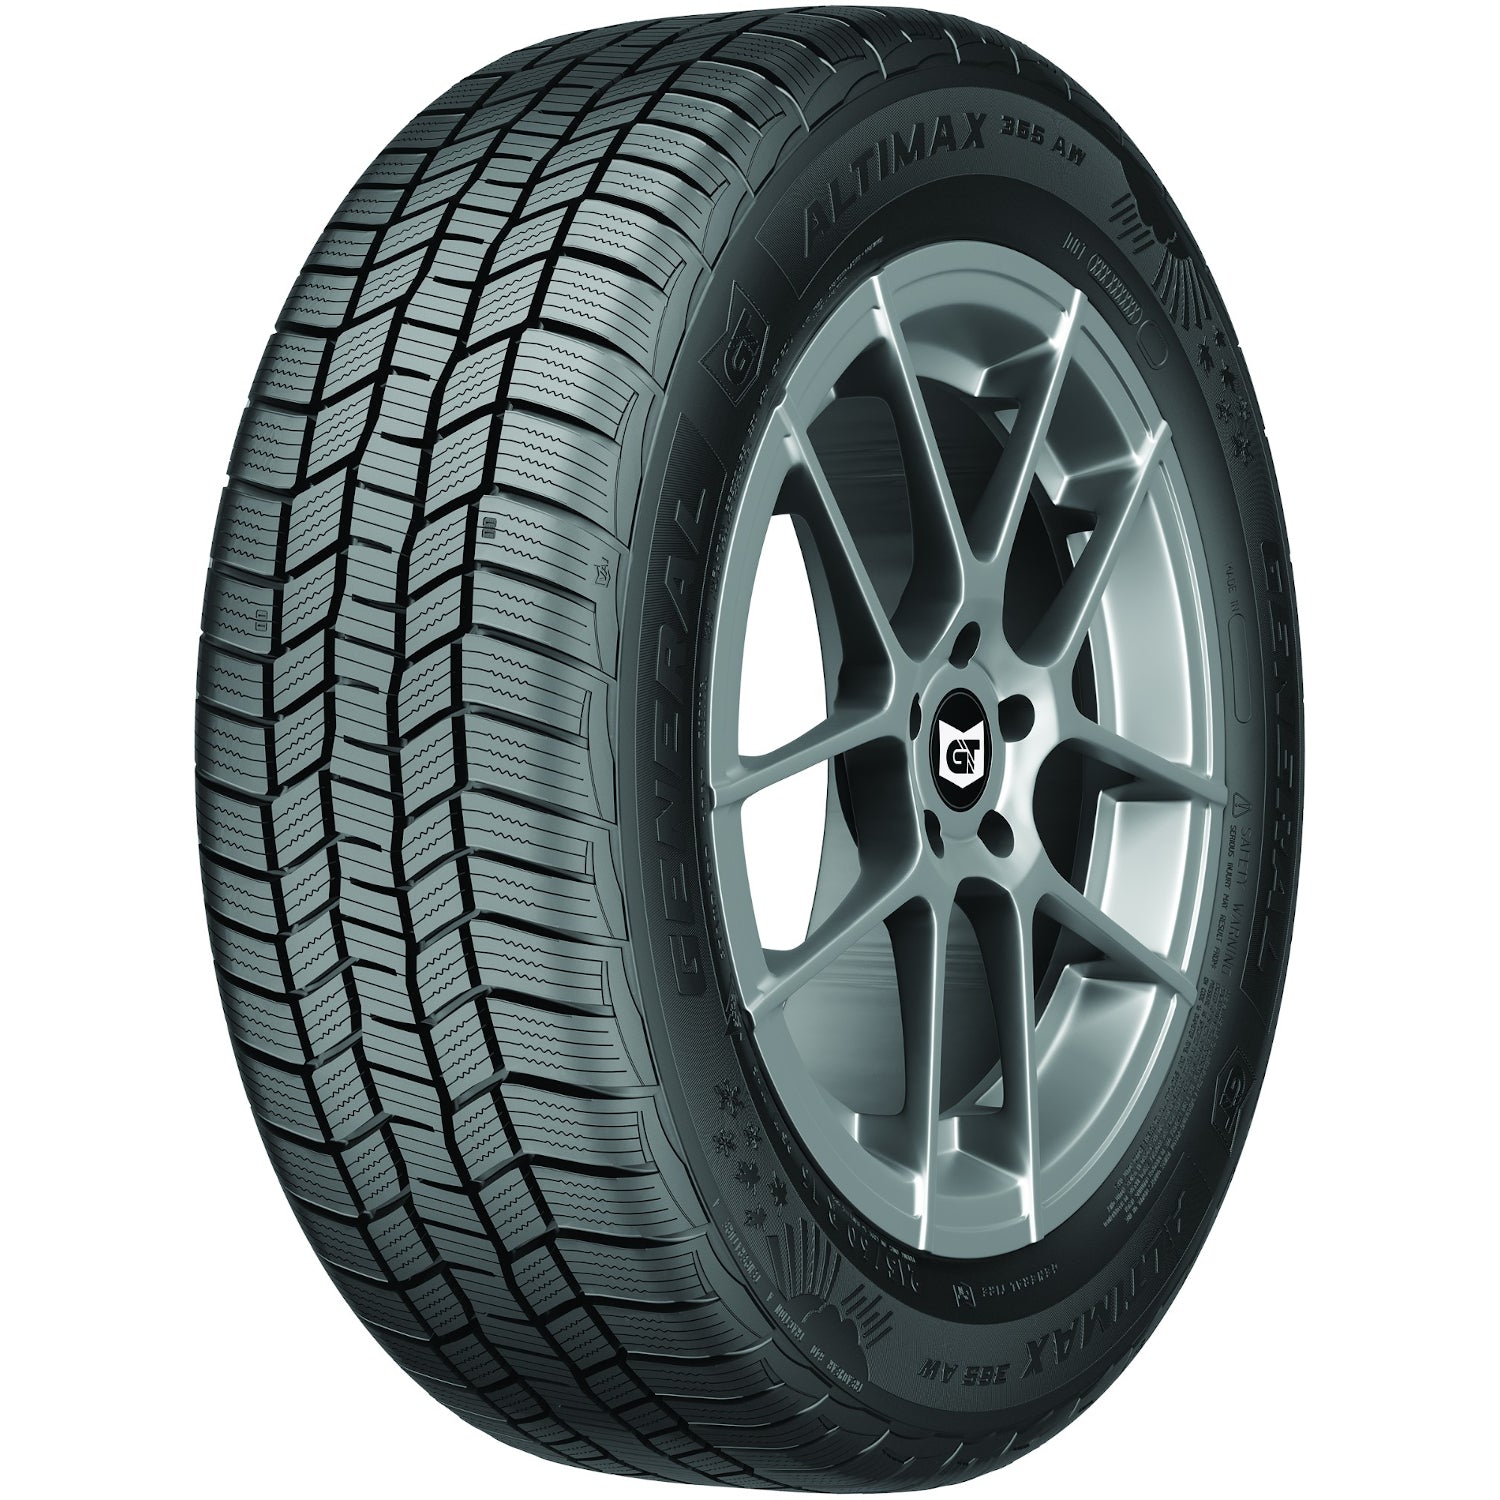 GENERAL ALTIMAX 365AW 235/55R20 (30.2X9.3R 20) Tires